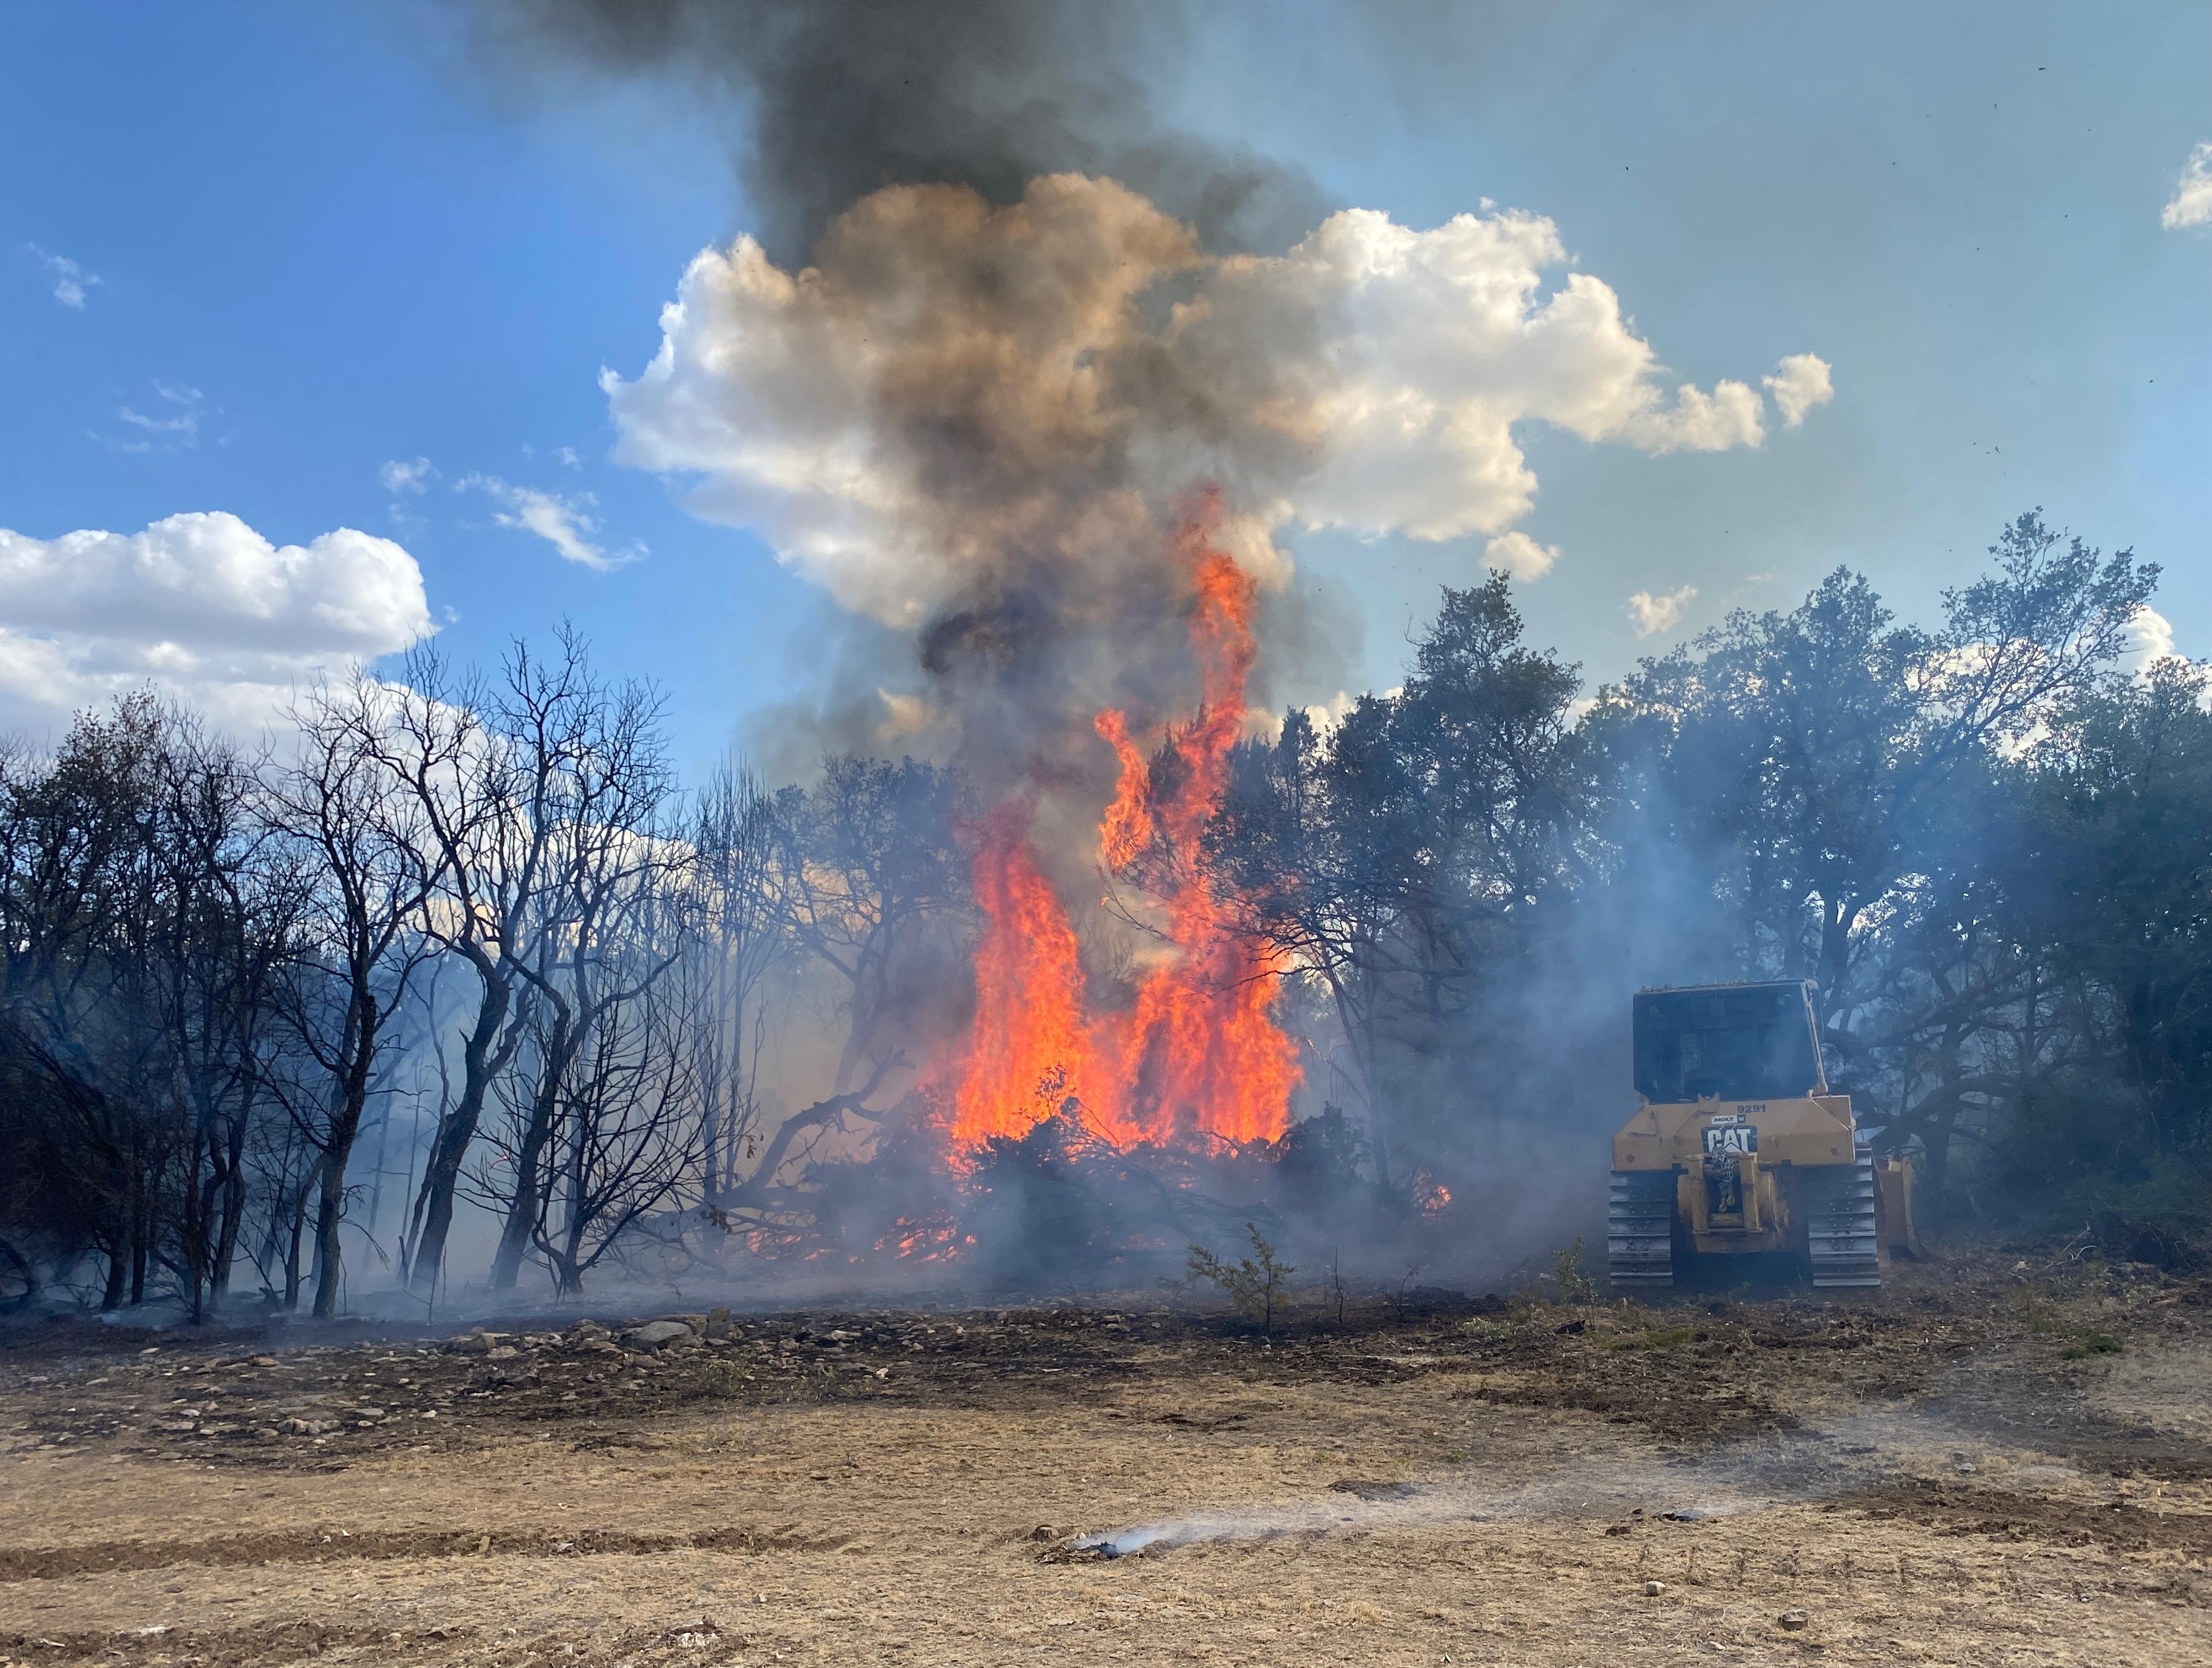 A yellow large bulldozer is next to a large plume of active red and orange flames. Many trees are in the area visibly smoking and charred. The sky is blue in the background with a plume of smoke